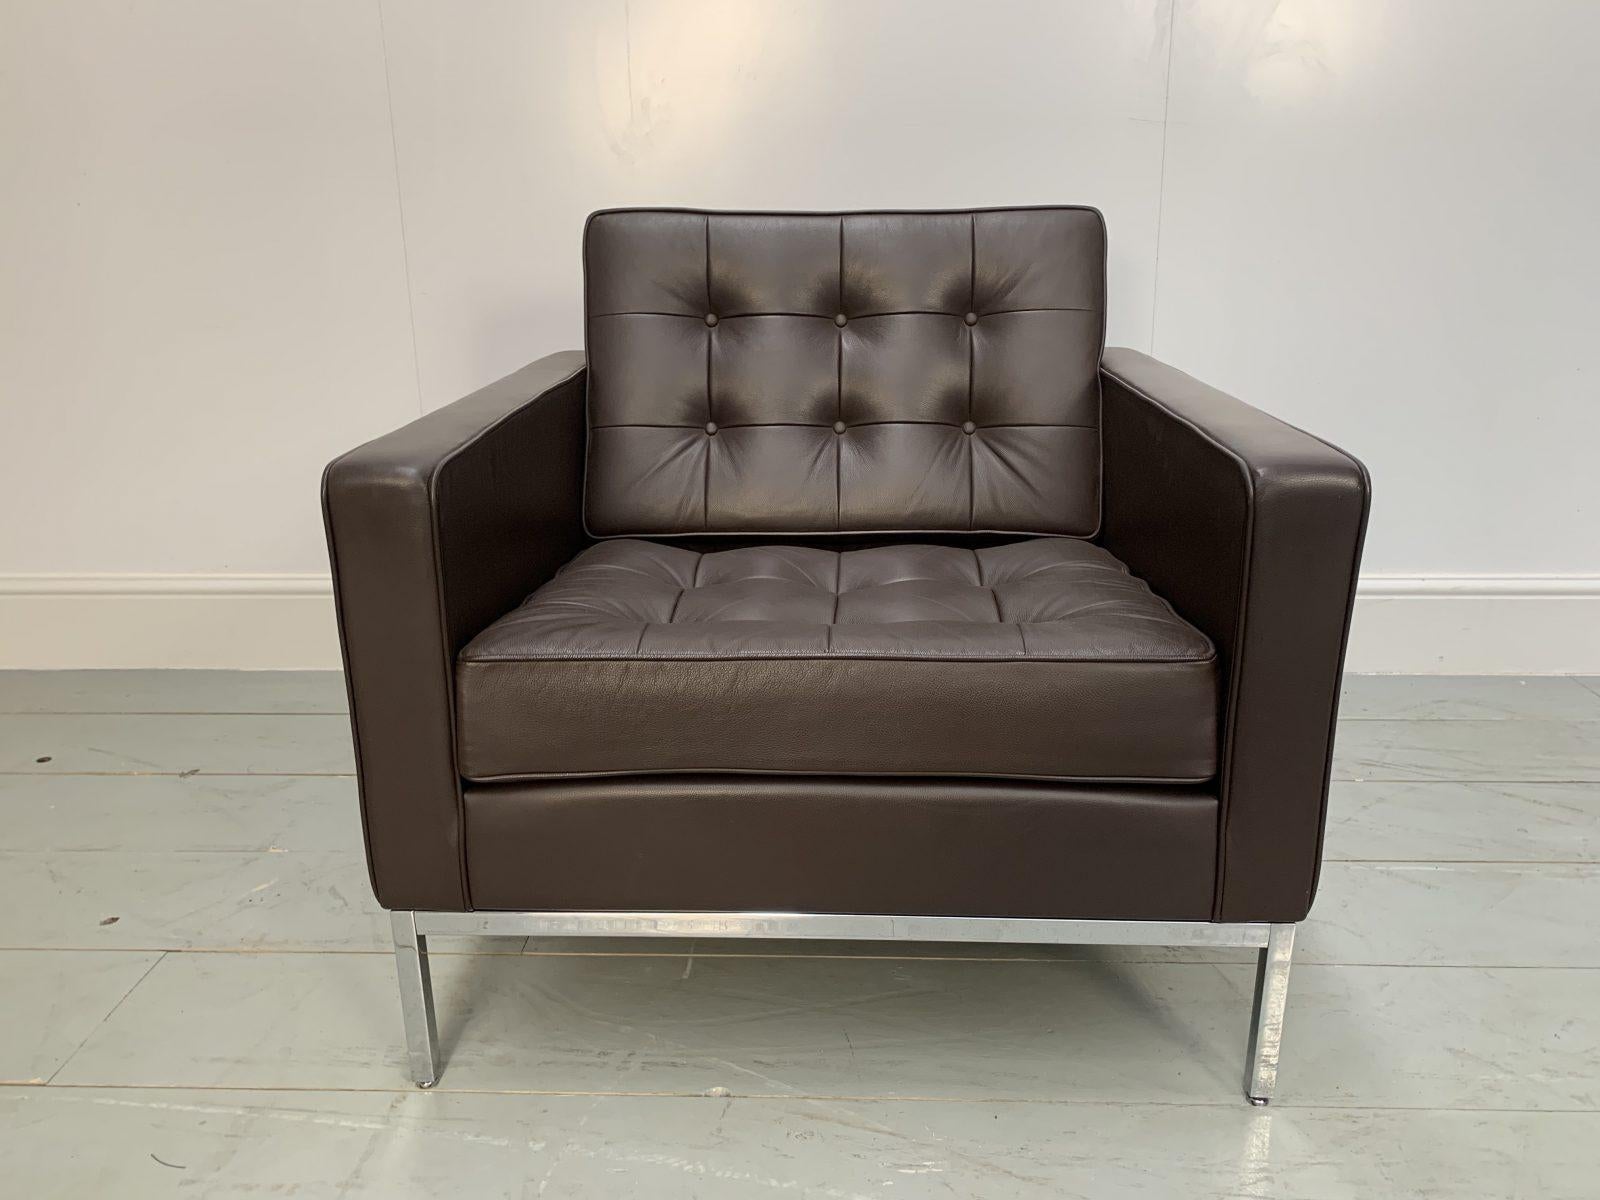 Knoll Studio “Florence Knoll” lounge chair armchair in “Sabrina” mahogany brown leather – 4 available

On offer on this occasion is a rare, original “Florence Knoll” lounge chair (remarkably, one of four identical pieces available at present) from